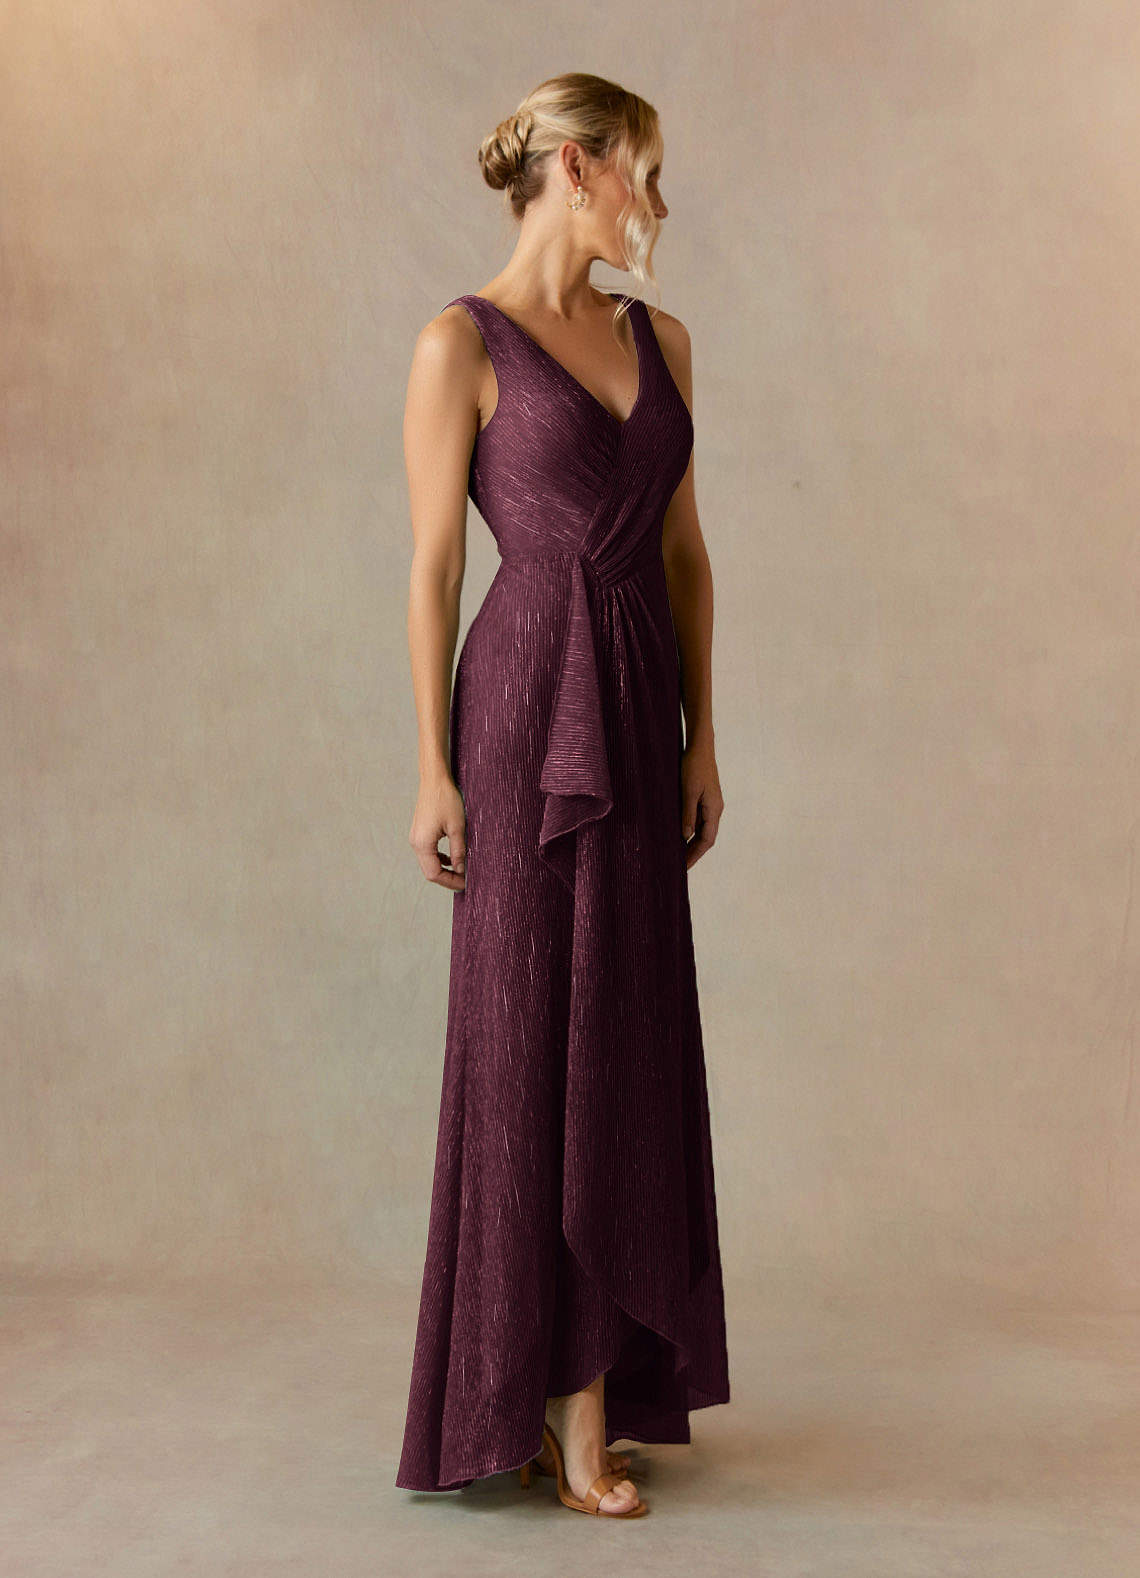 Upstudio Tuscon Mother of the Bride Dresses A-Line V-Neck Ruched Metallic Mesh Asymmetrical Dress image1